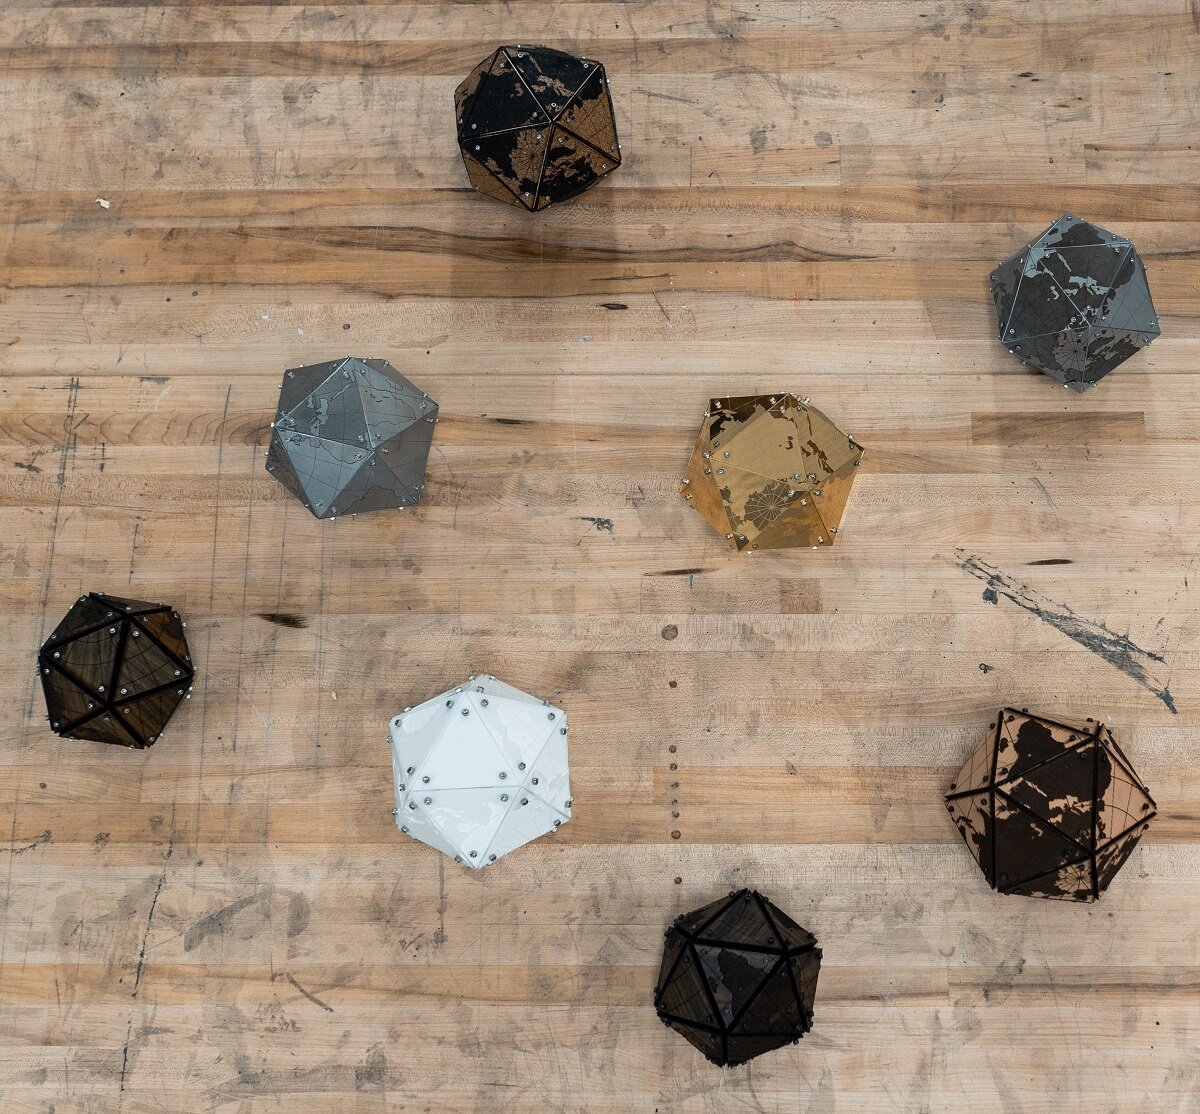   Ande Brown  , Icosahedron Globes . COURTESY OF THE ARTIST 